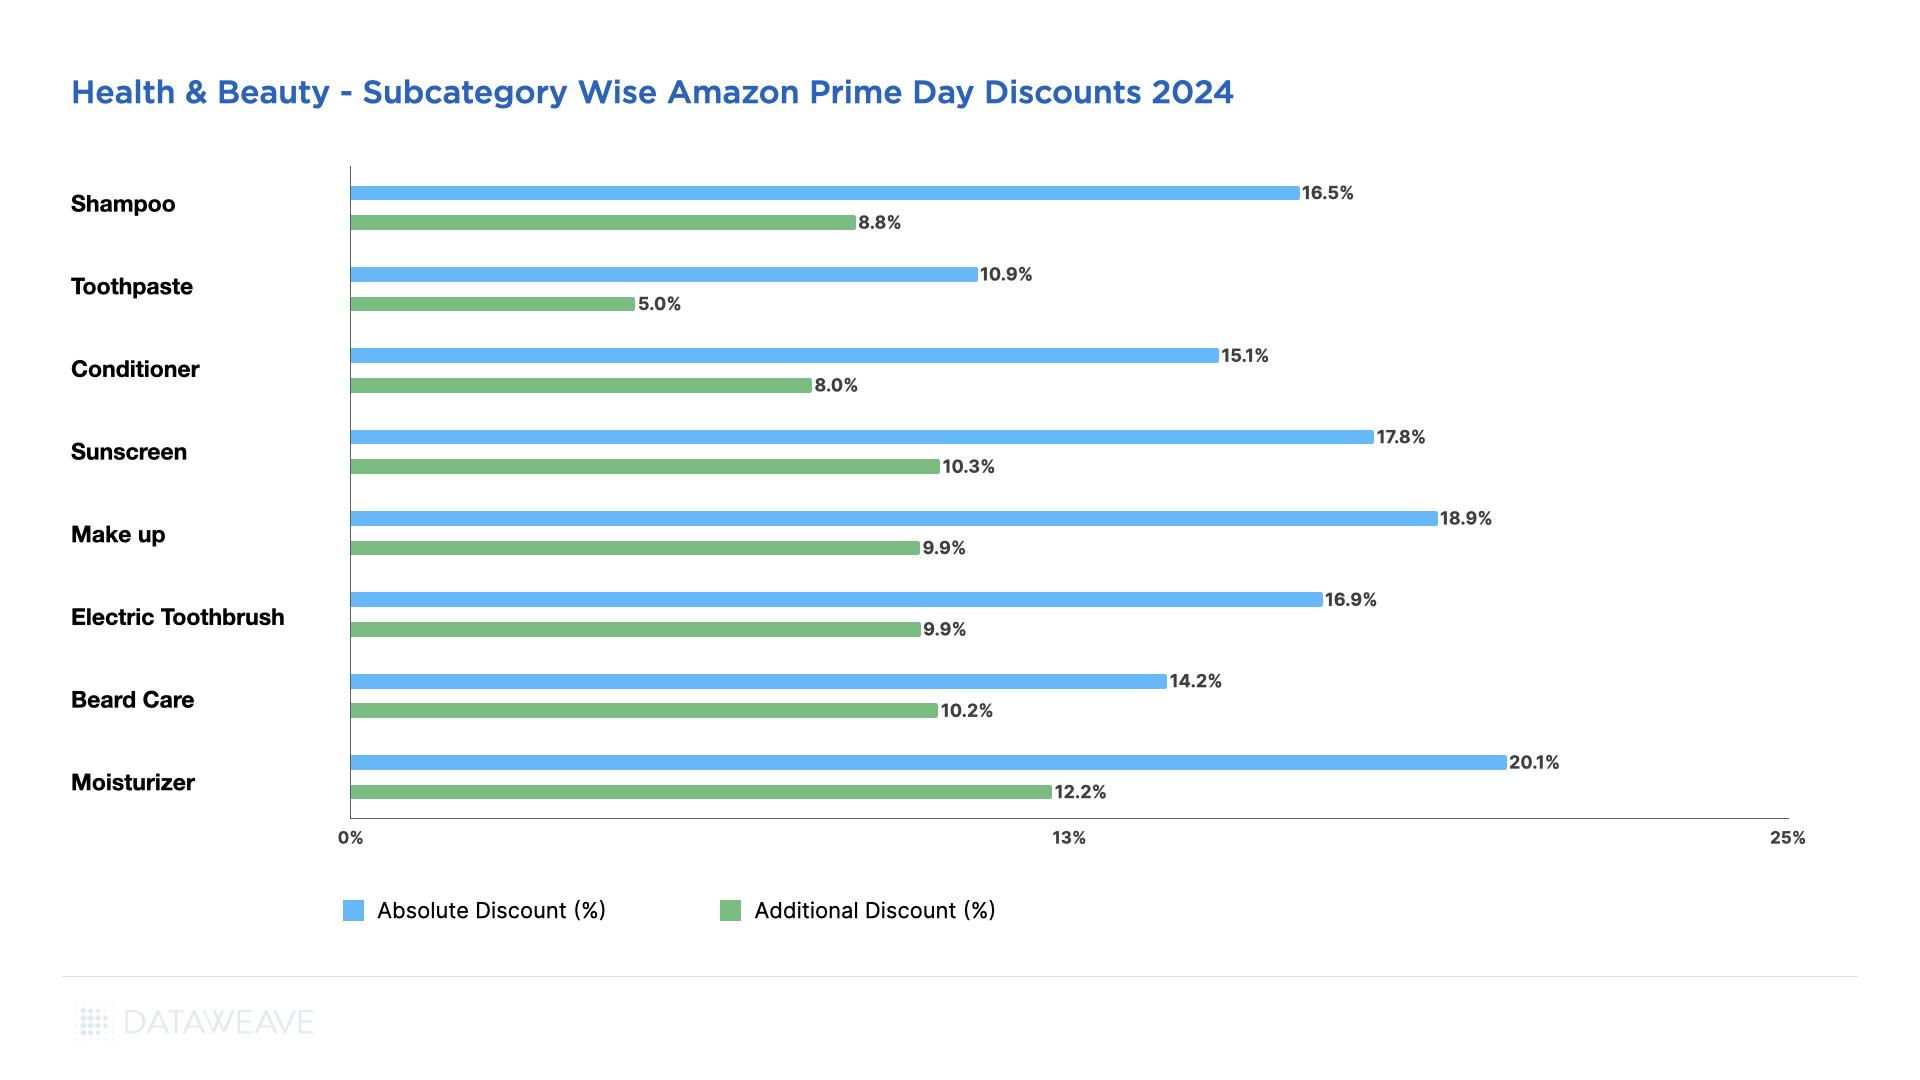 Discounts offered on Health & Beauty Subcategories During Amazon Prime Day USA 2024